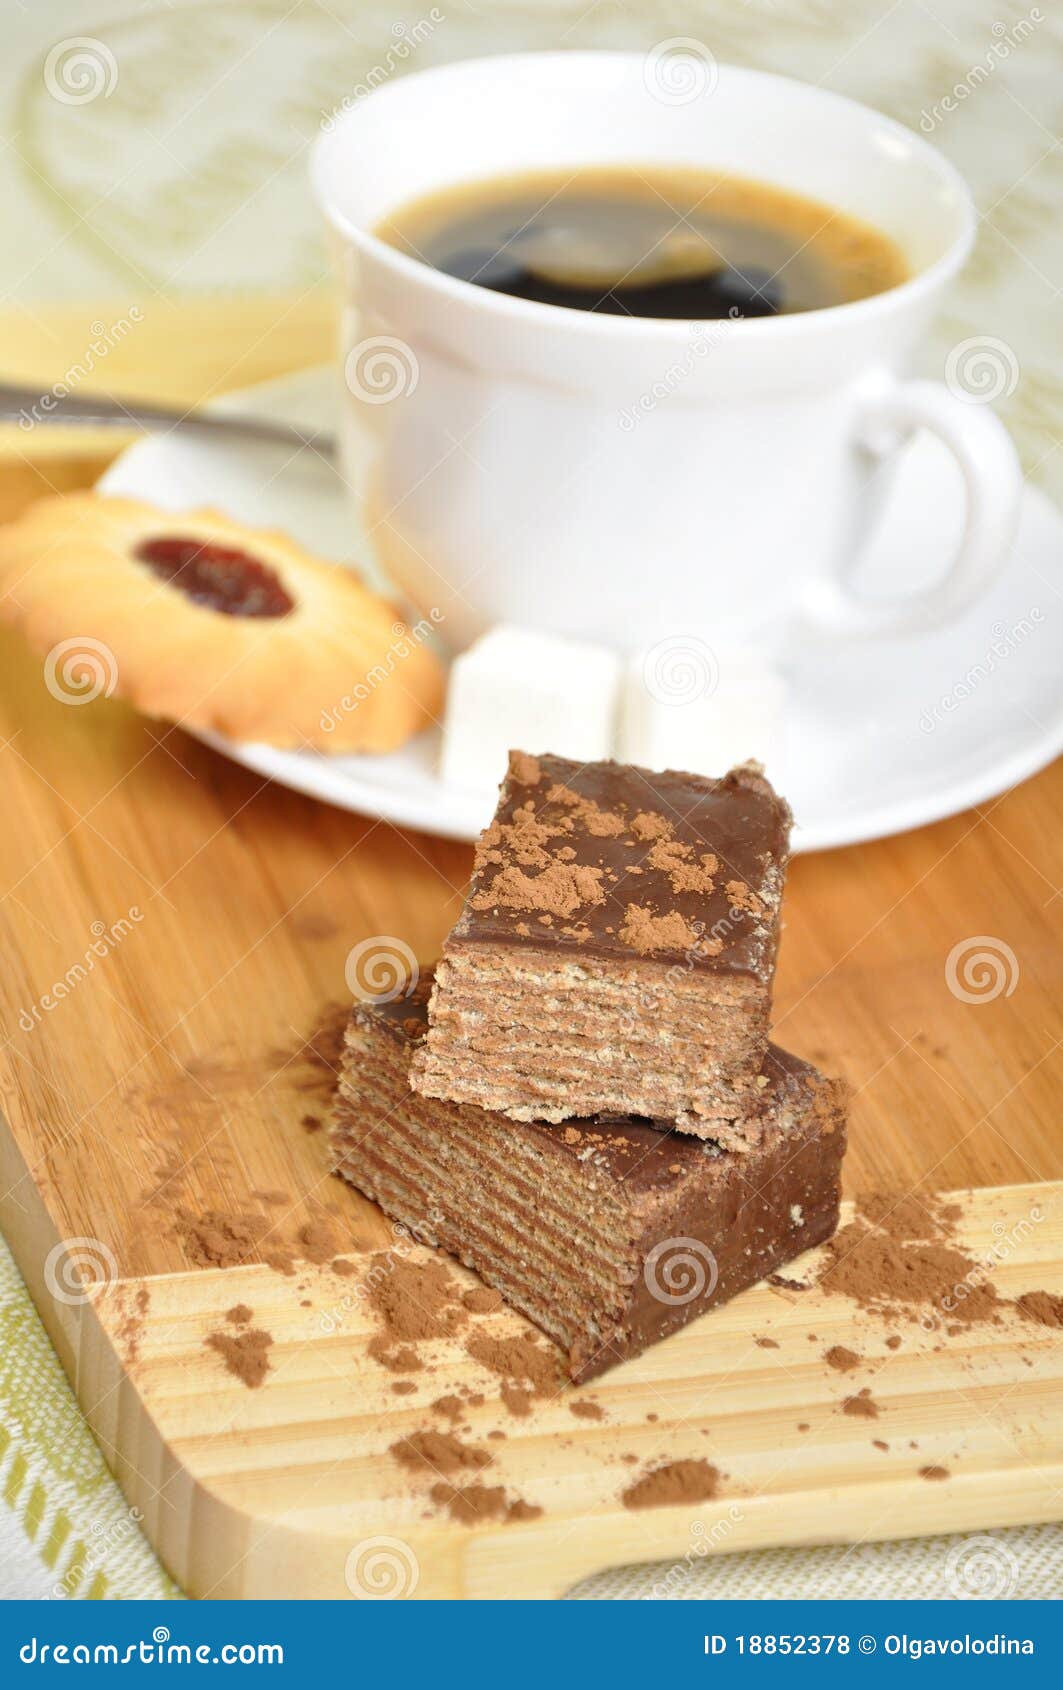 Coffee with Biscuits and Cake Stock Photo - Image of espresso, high ...